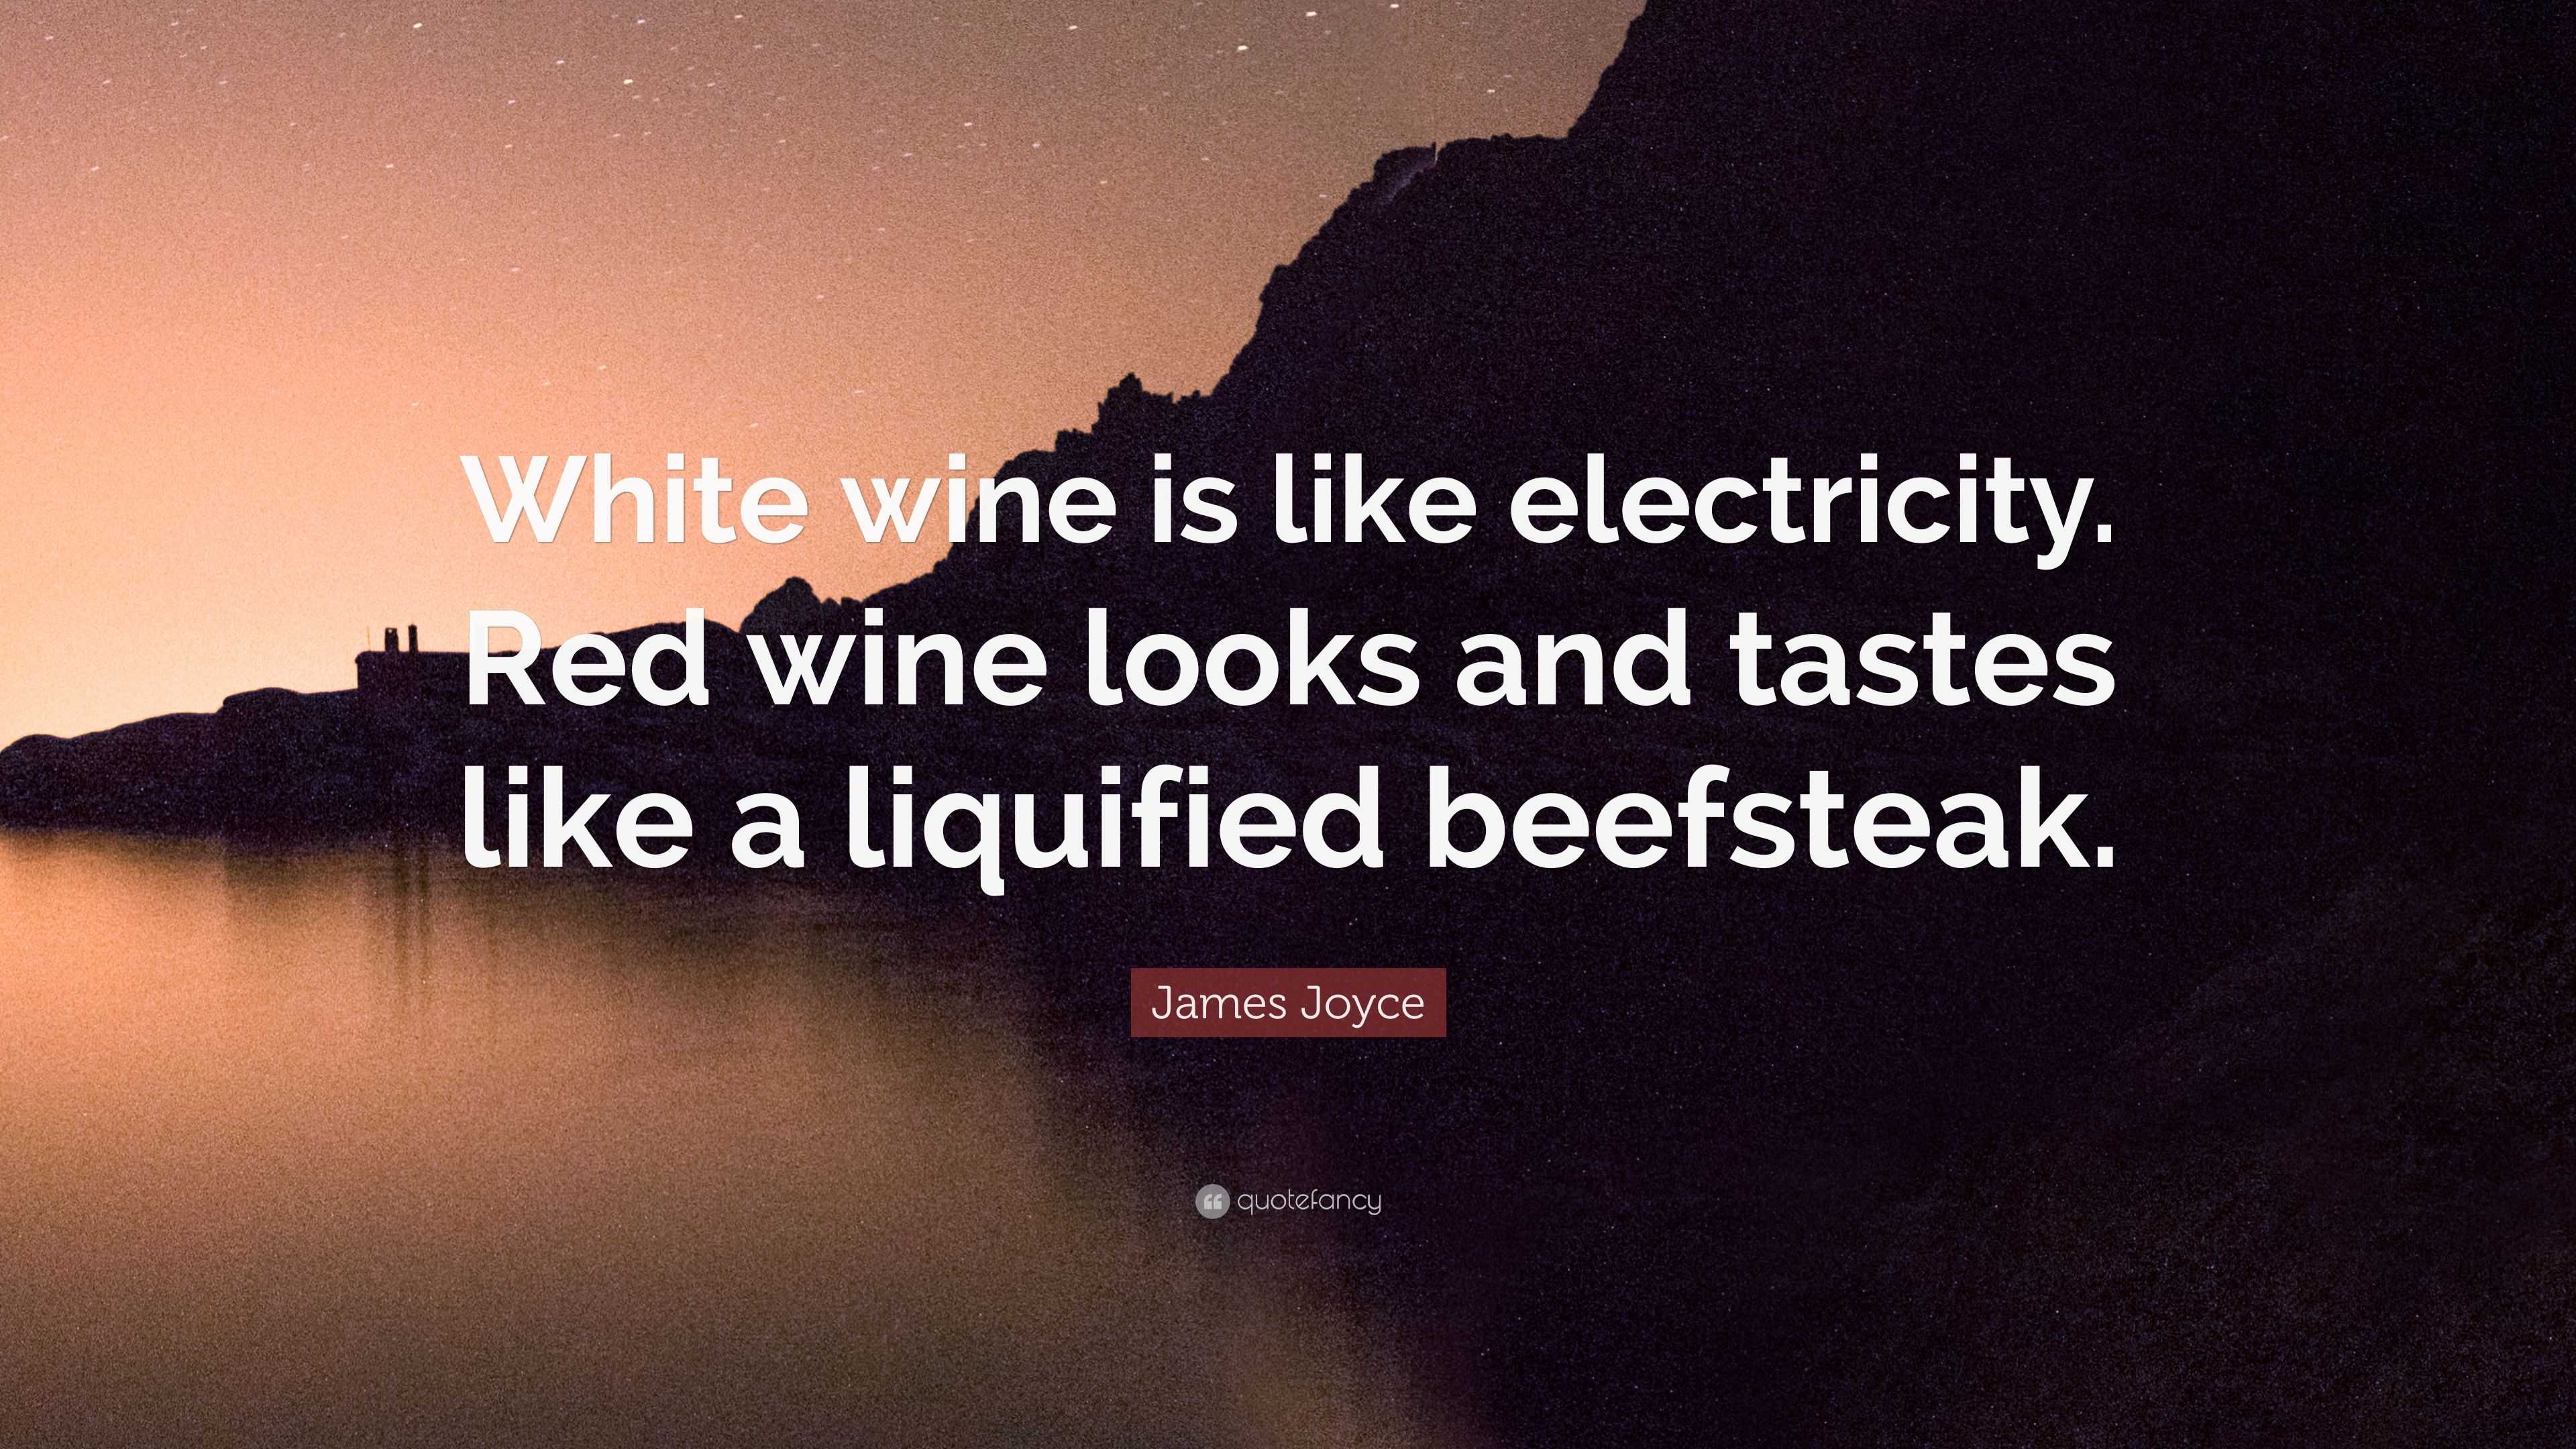 James Joyce Quote “White wine is like electricity Red wine looks and tastes